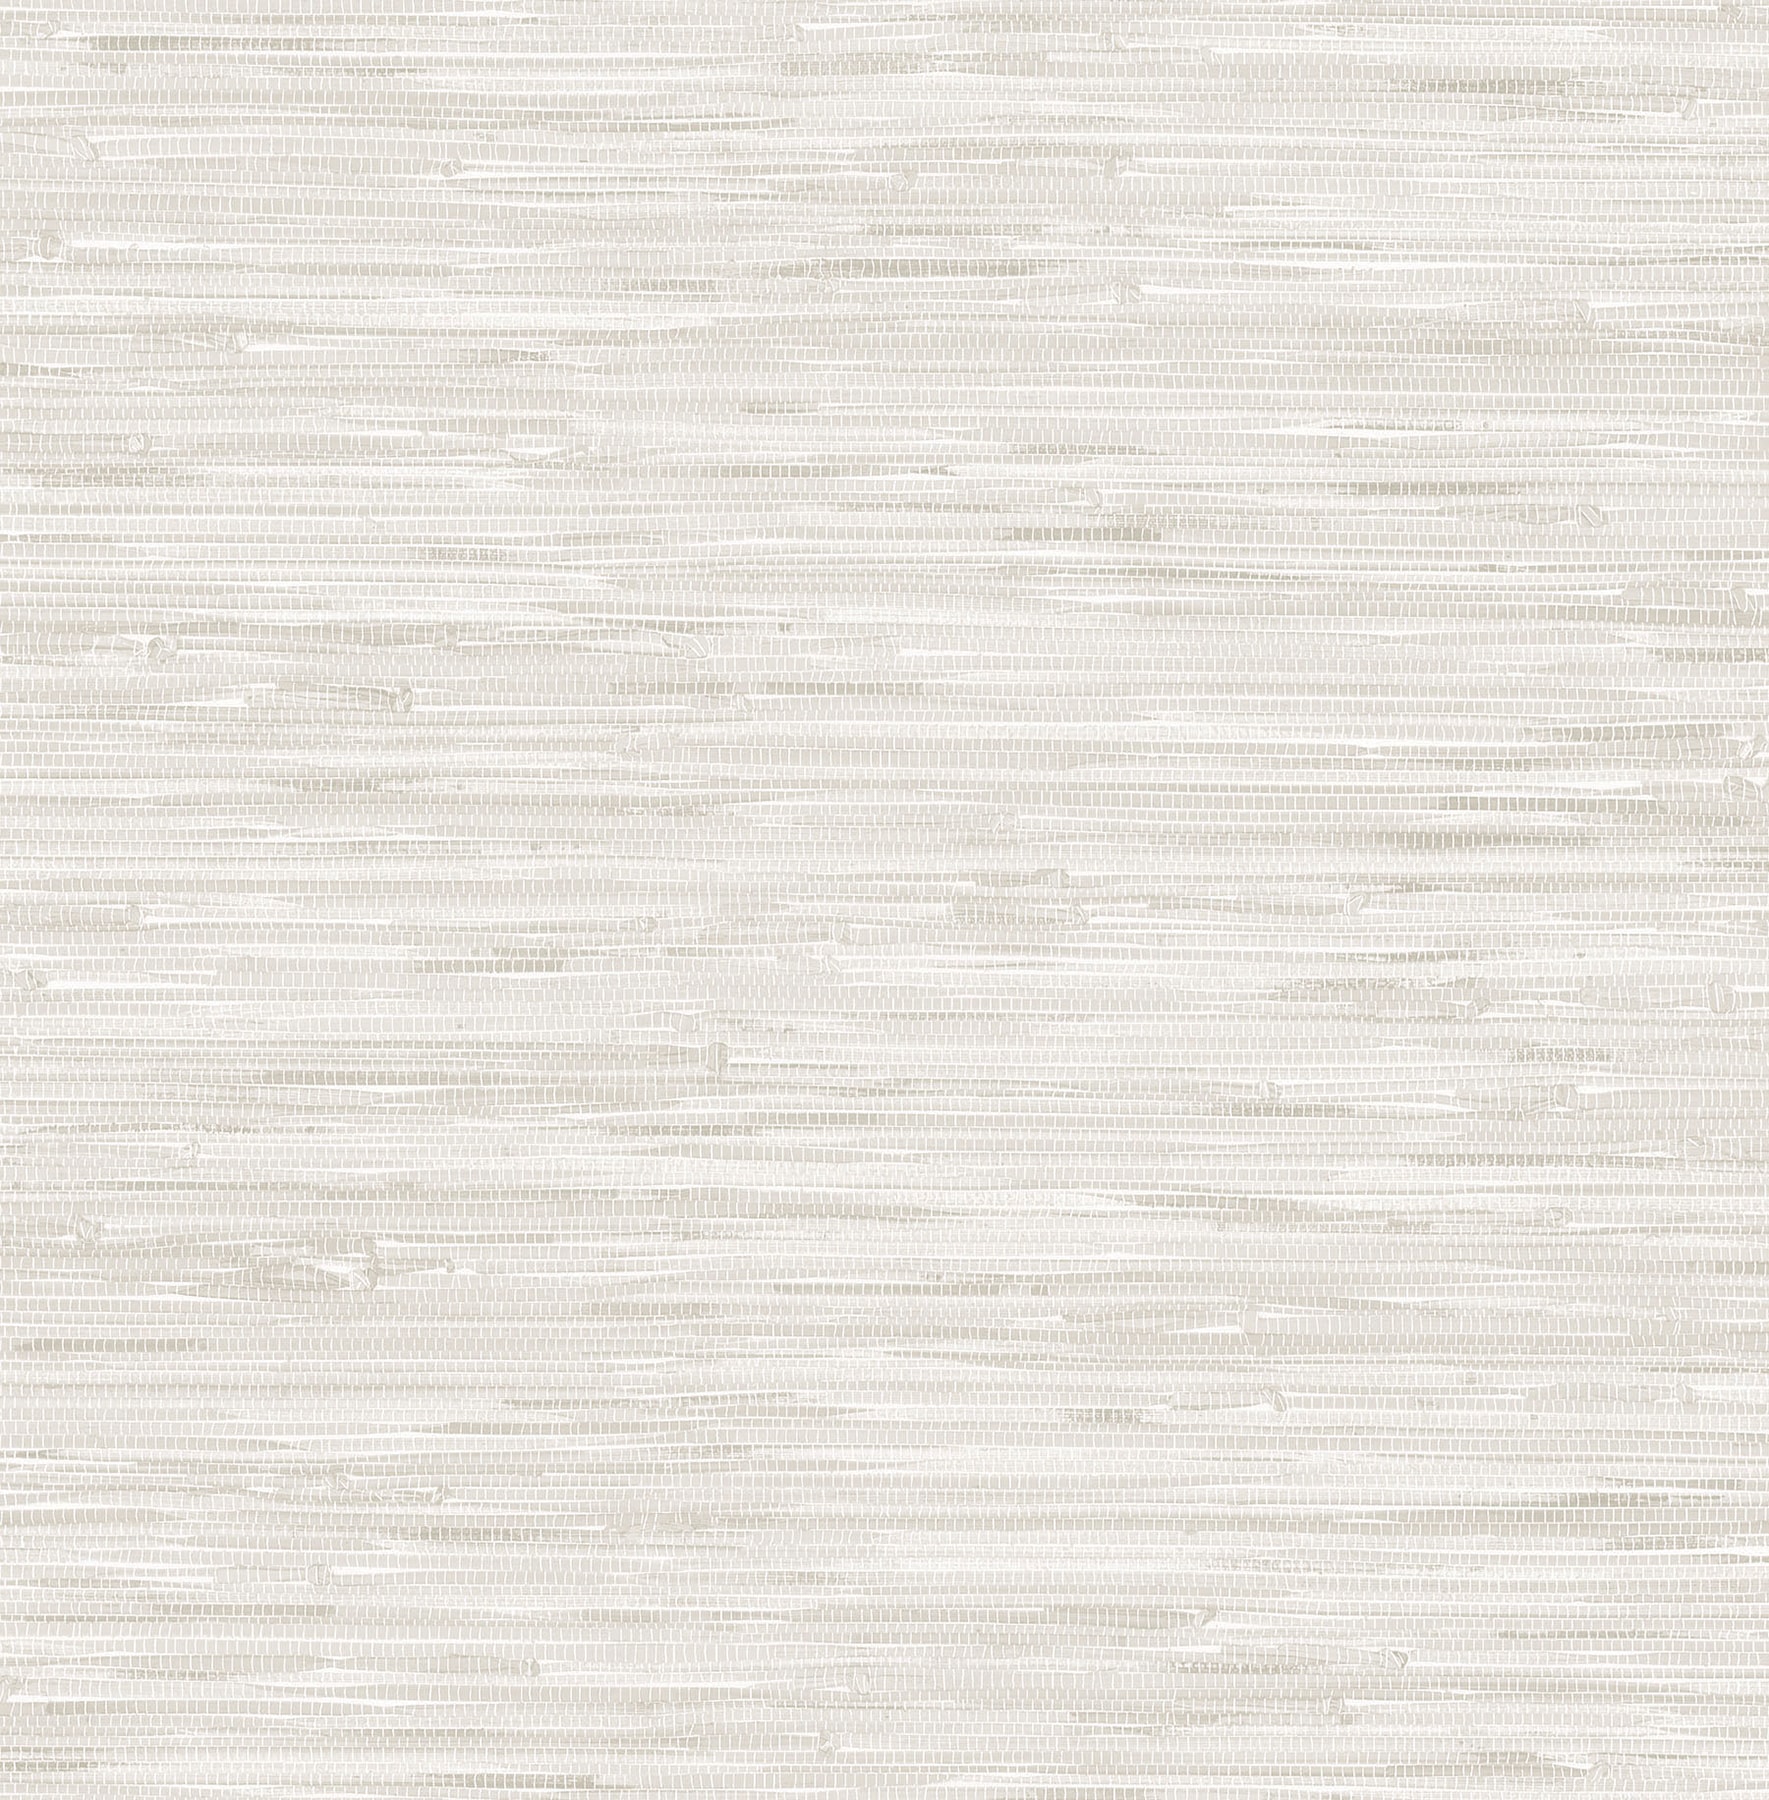 NextWall Faux Marble Tile Vinyl Peel  Stick Wallpaper Roll Covers 3075  Sq Ft NW35700  The Home Depot